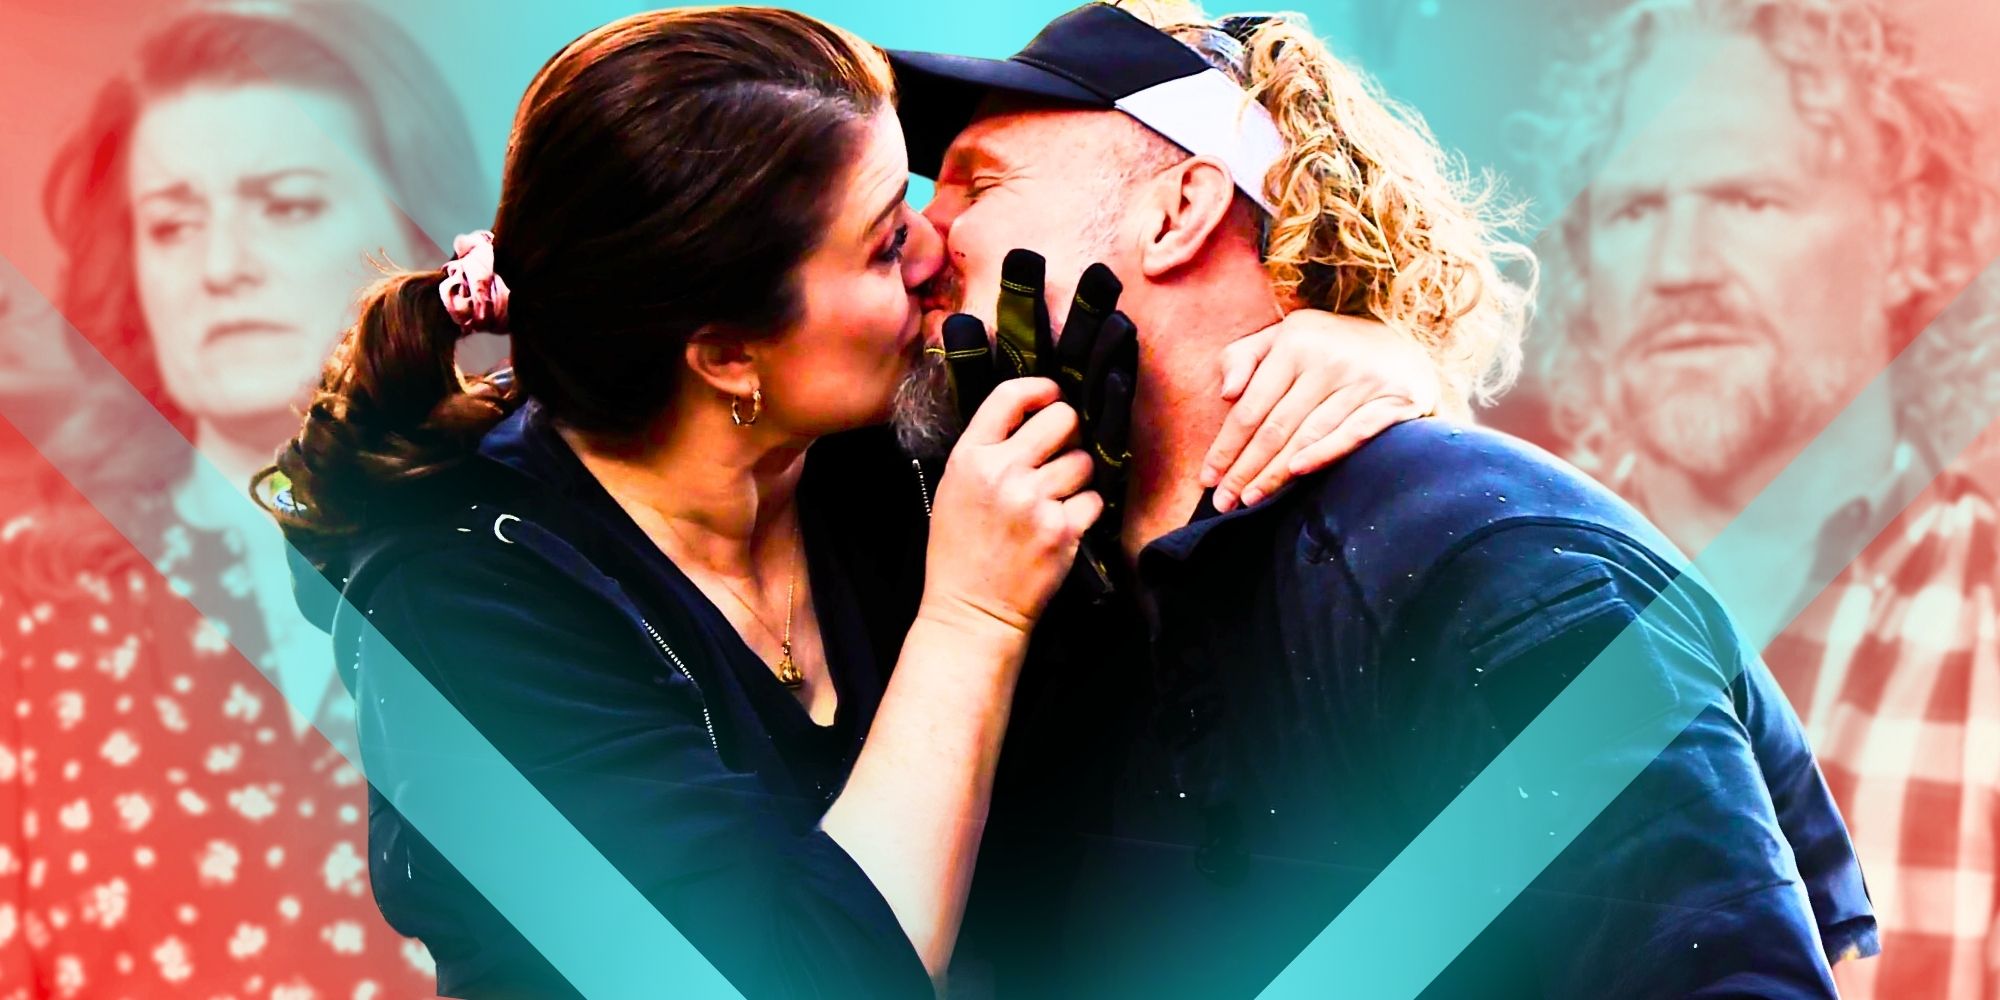 Sister Wives Robyn & Kody kissing with montage in background red and teal filtered background